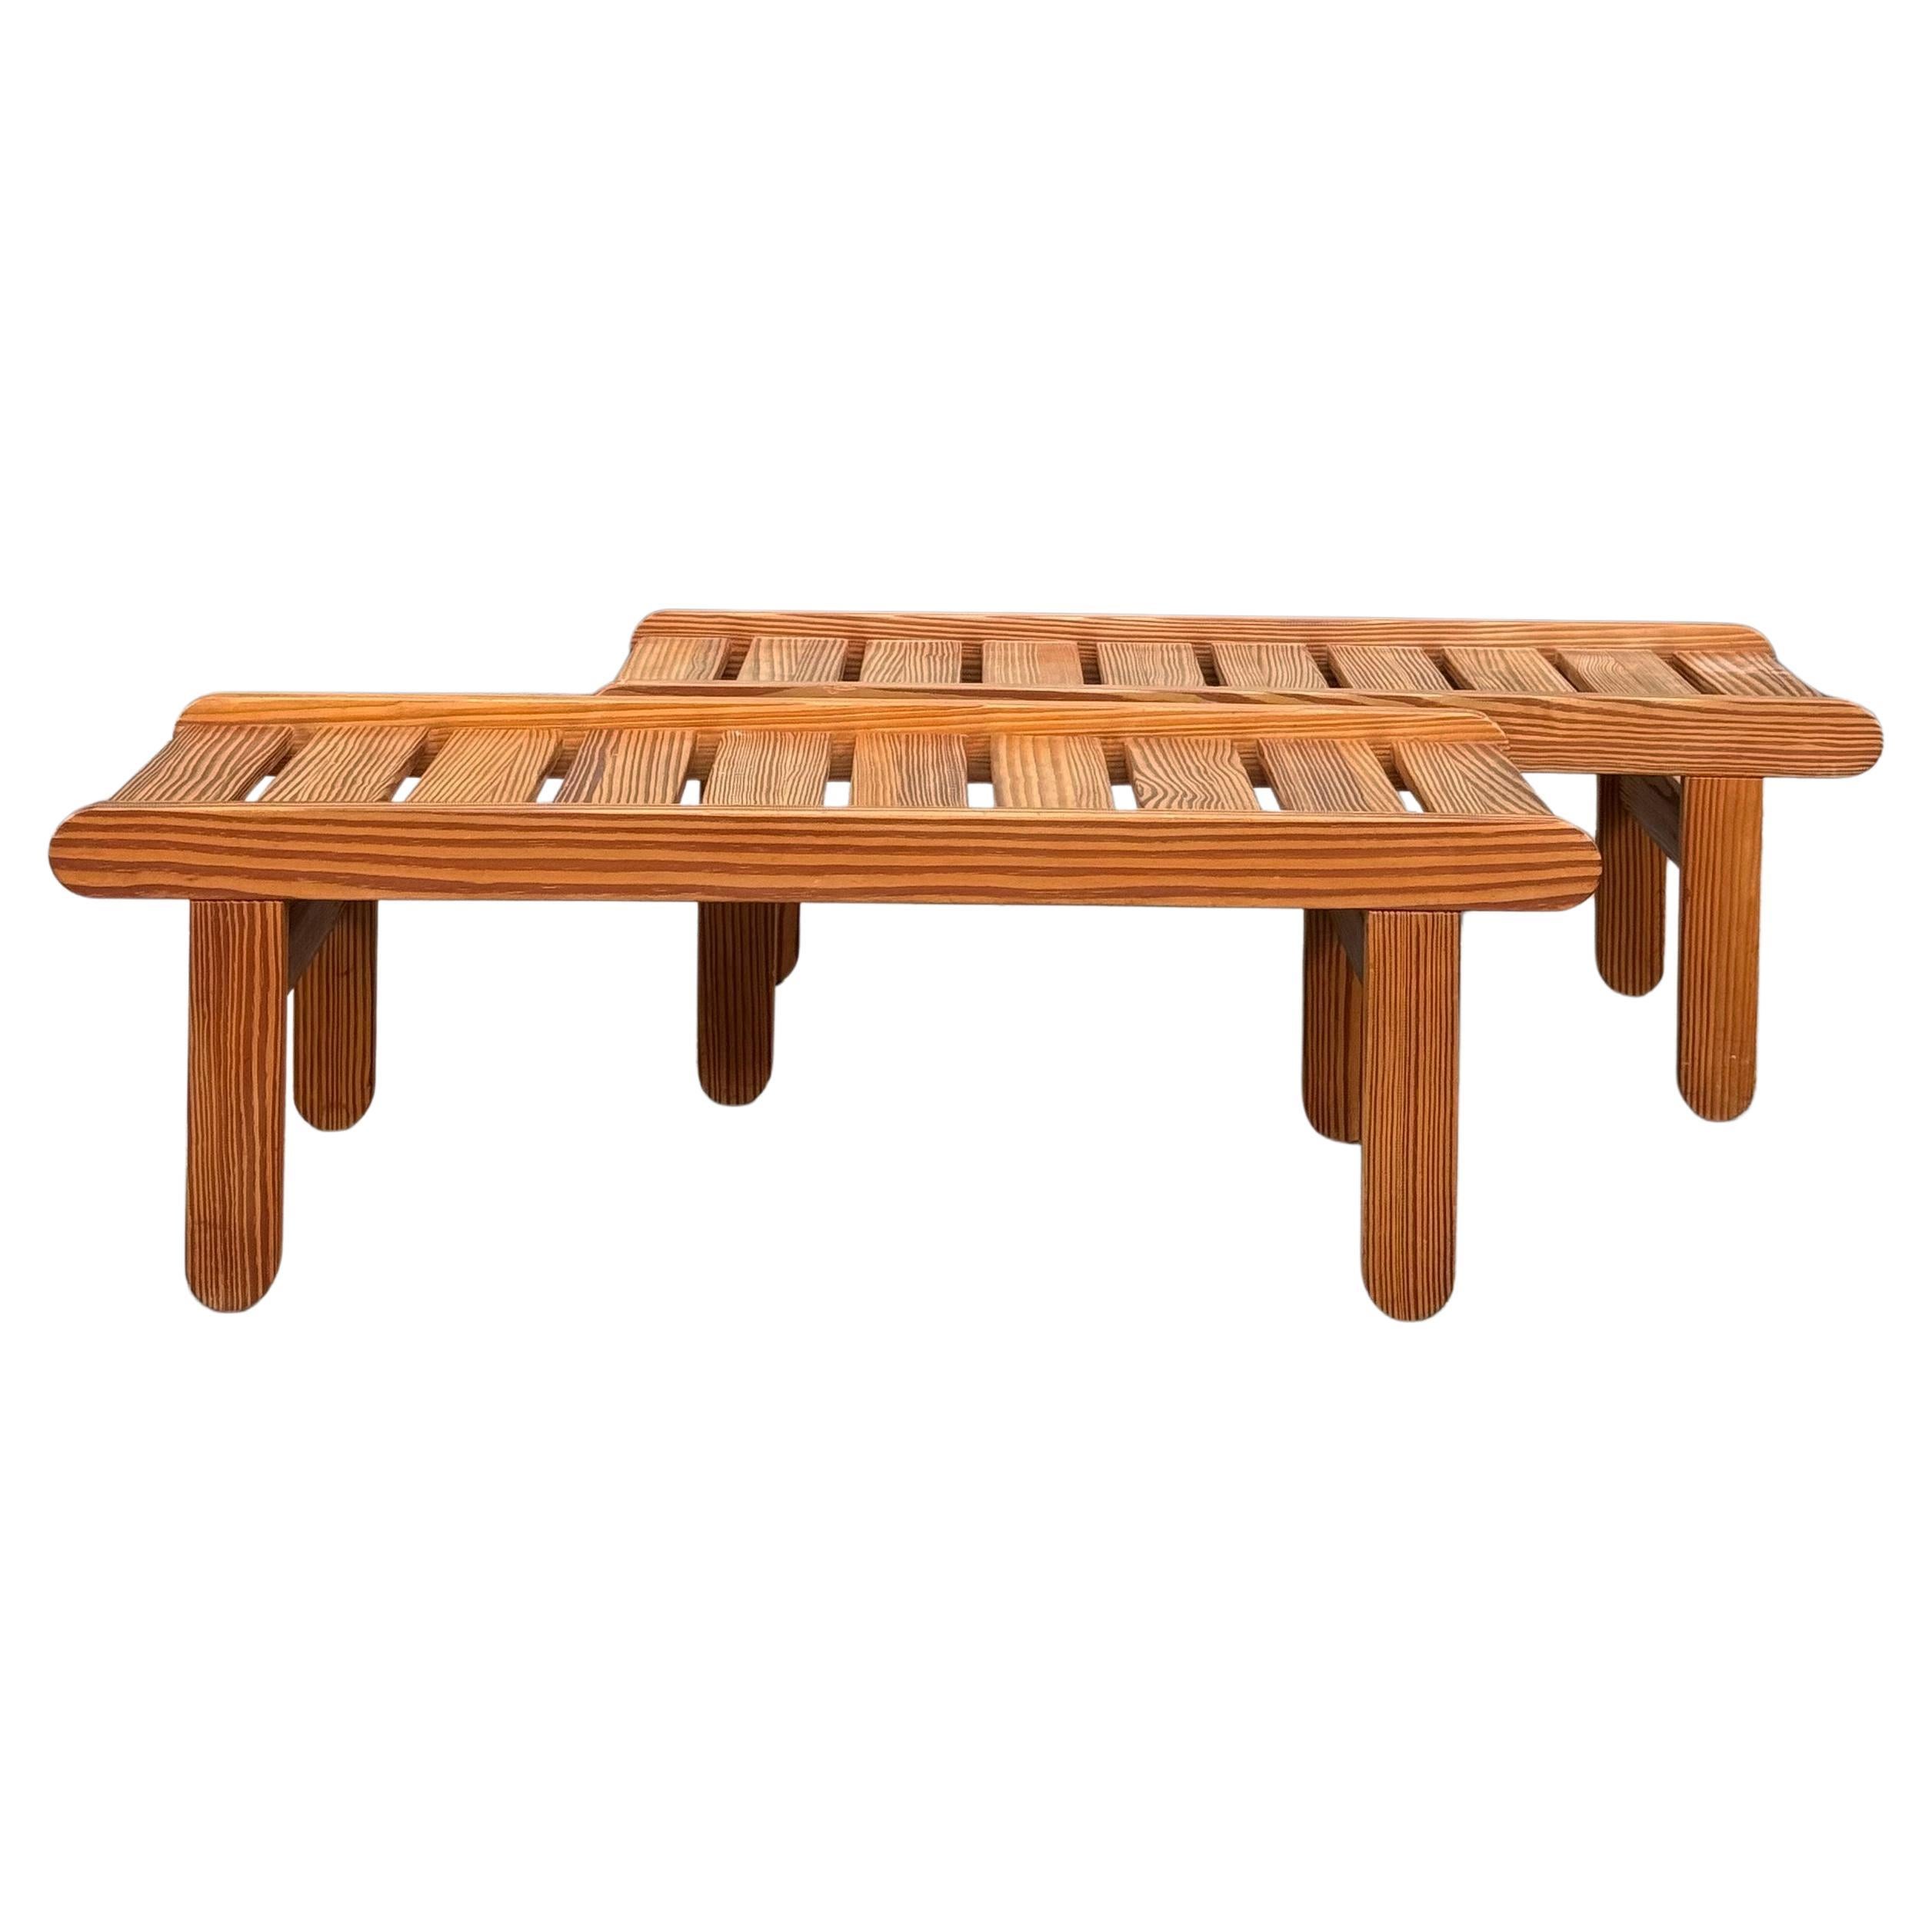 A Pair of Pine Benches, Bernt Petersen, Denmark For Sale